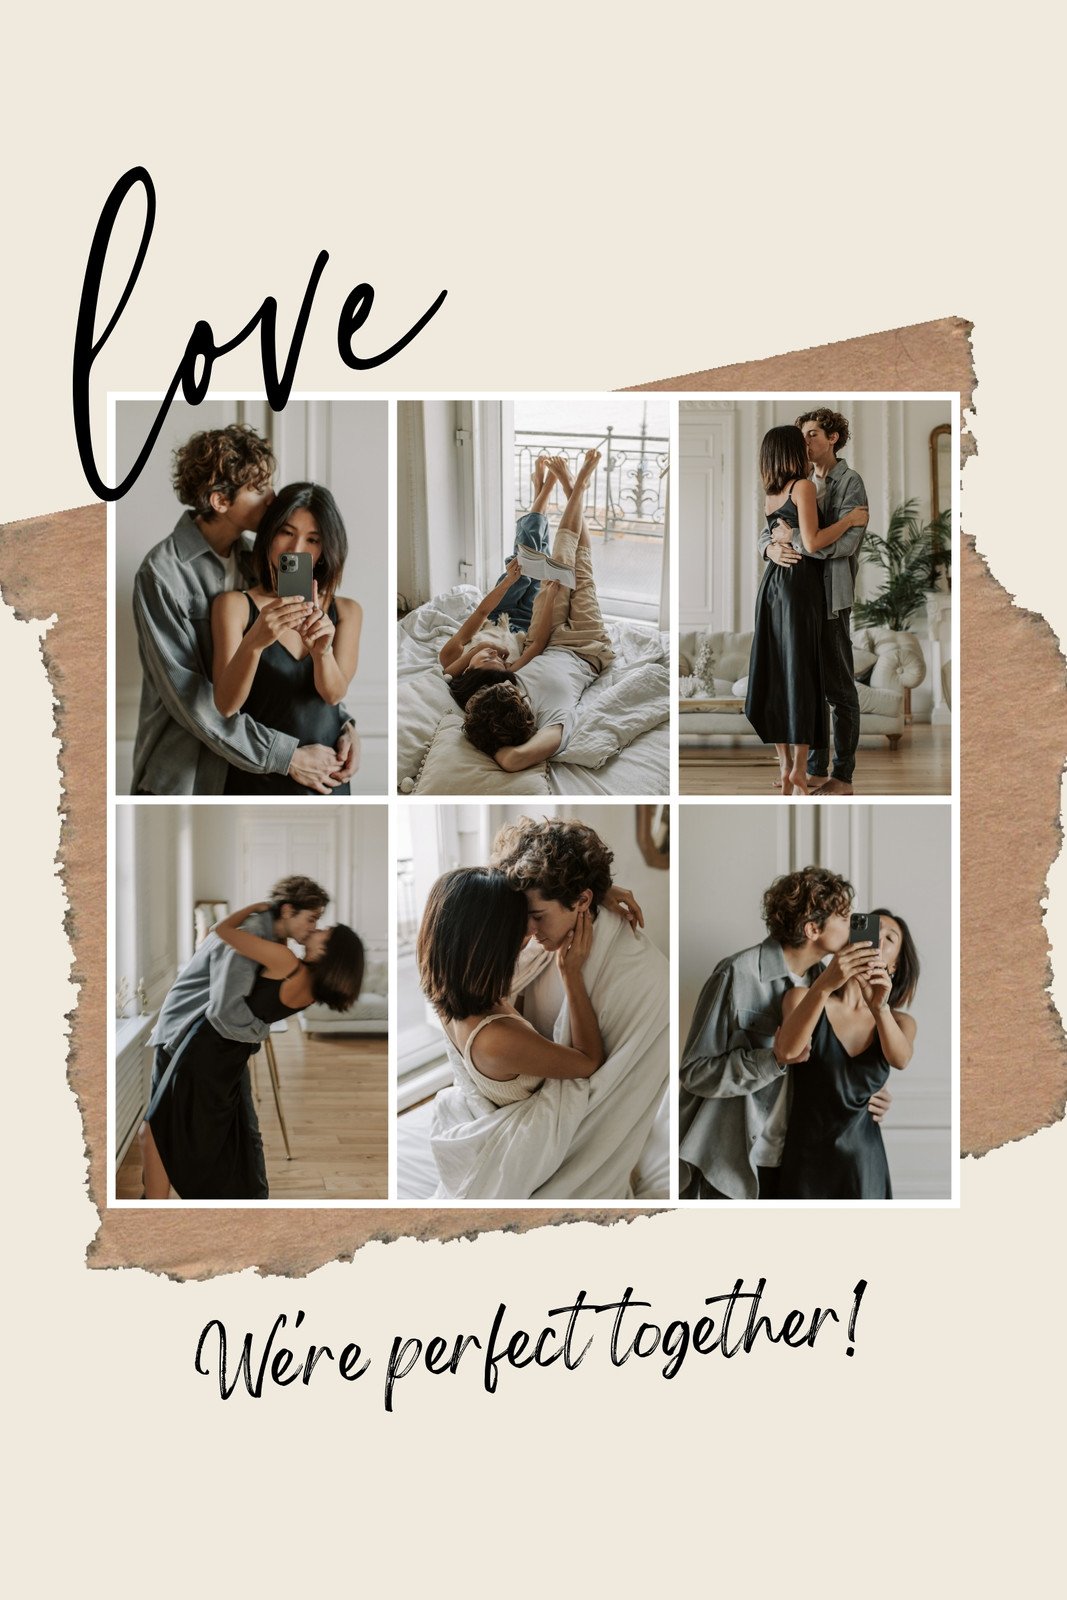 https://marketplace.canva.com/EAFBtwJJ5XI/3/0/1067w/canva-brown-white-and-beige-sweet-couple-photo-collage-GtXkmghT04I.jpg